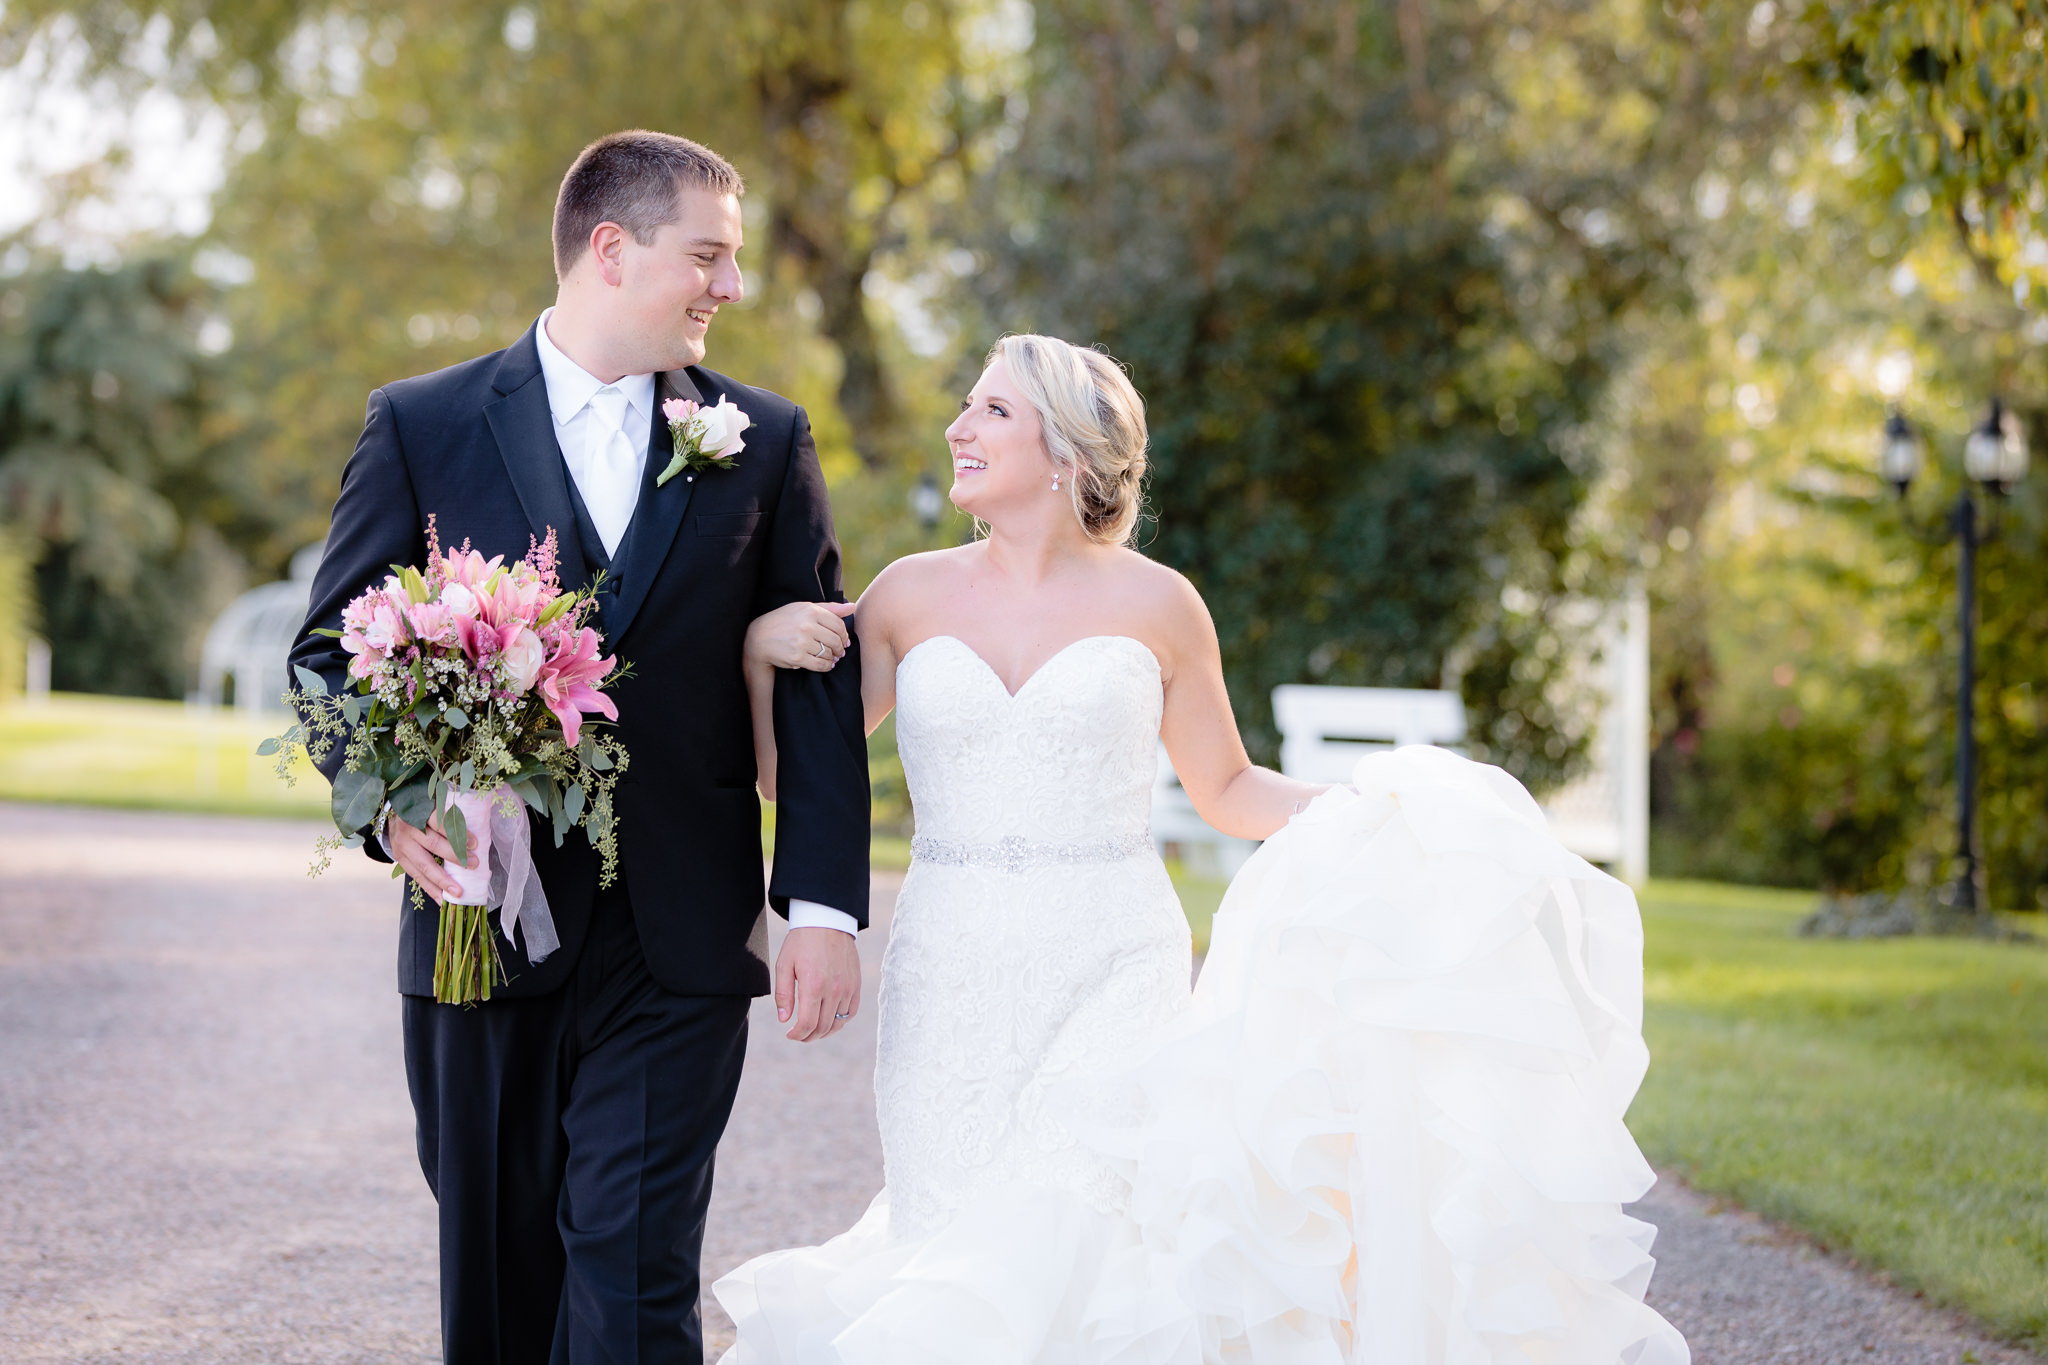 Bride & groom walk together during portraits at Greystone Fields